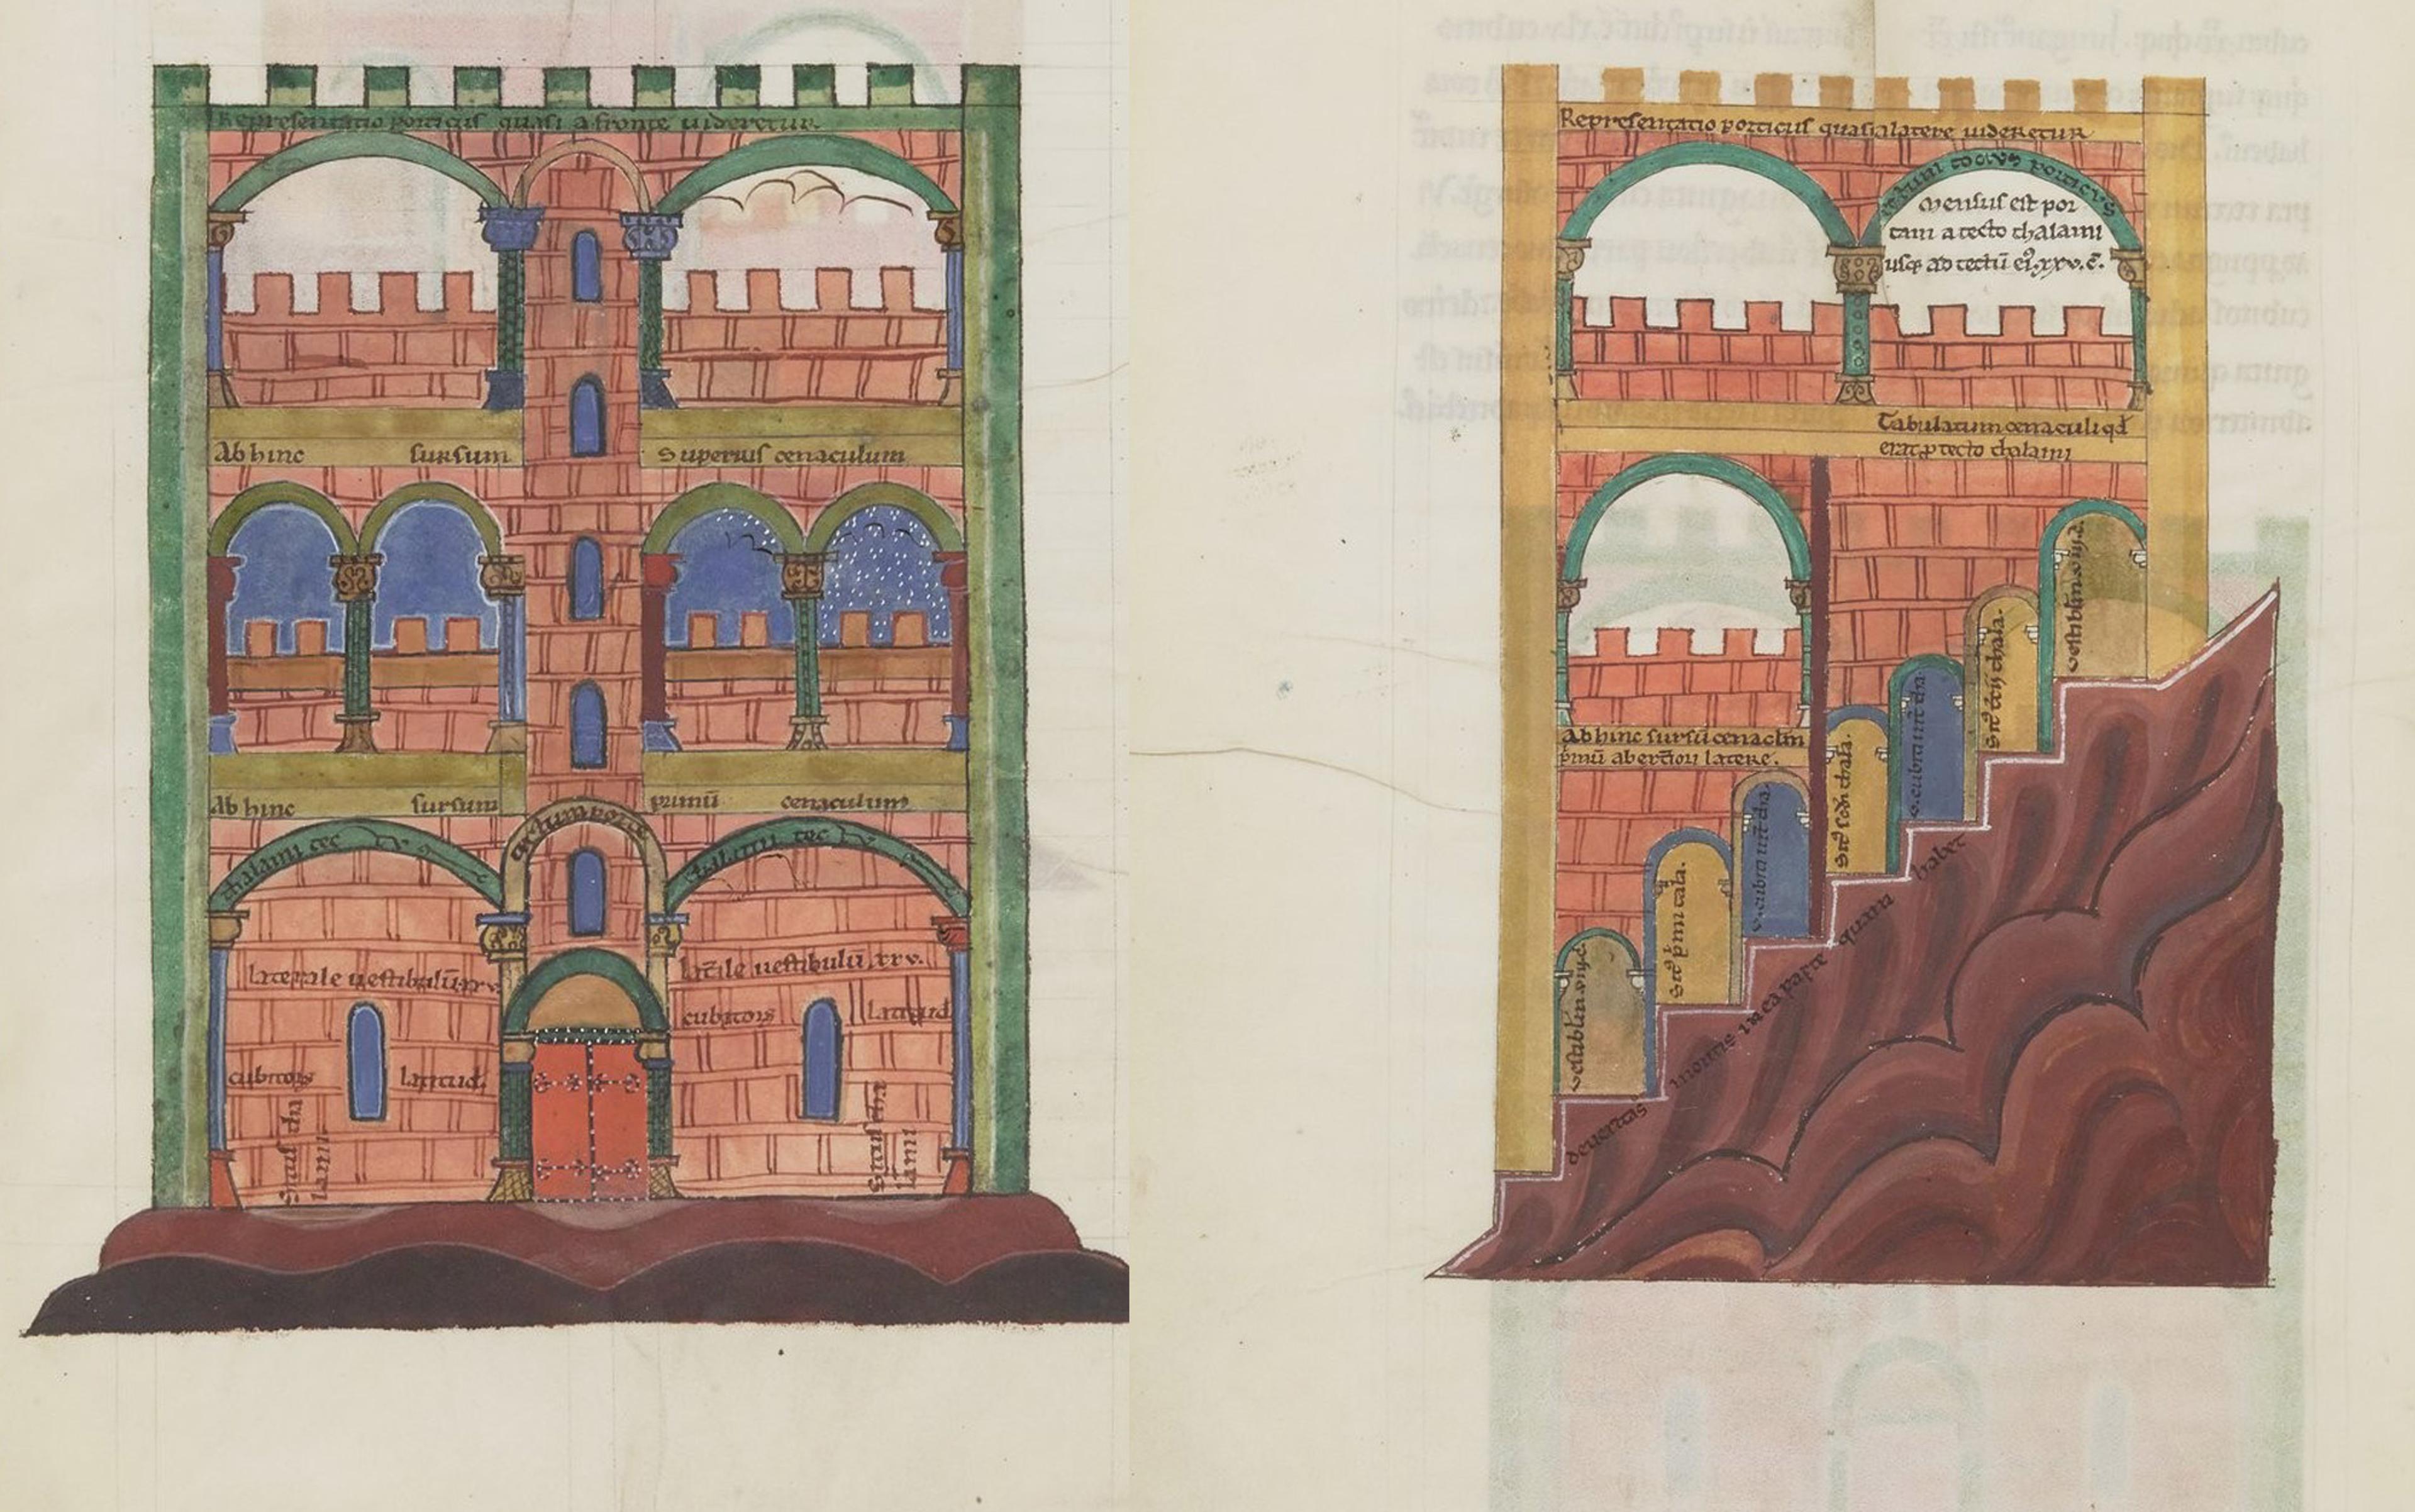 Medieval manuscript illustration showing a cutaway view of a multi-storey castle and a fortified structure, with inscriptions and arches.